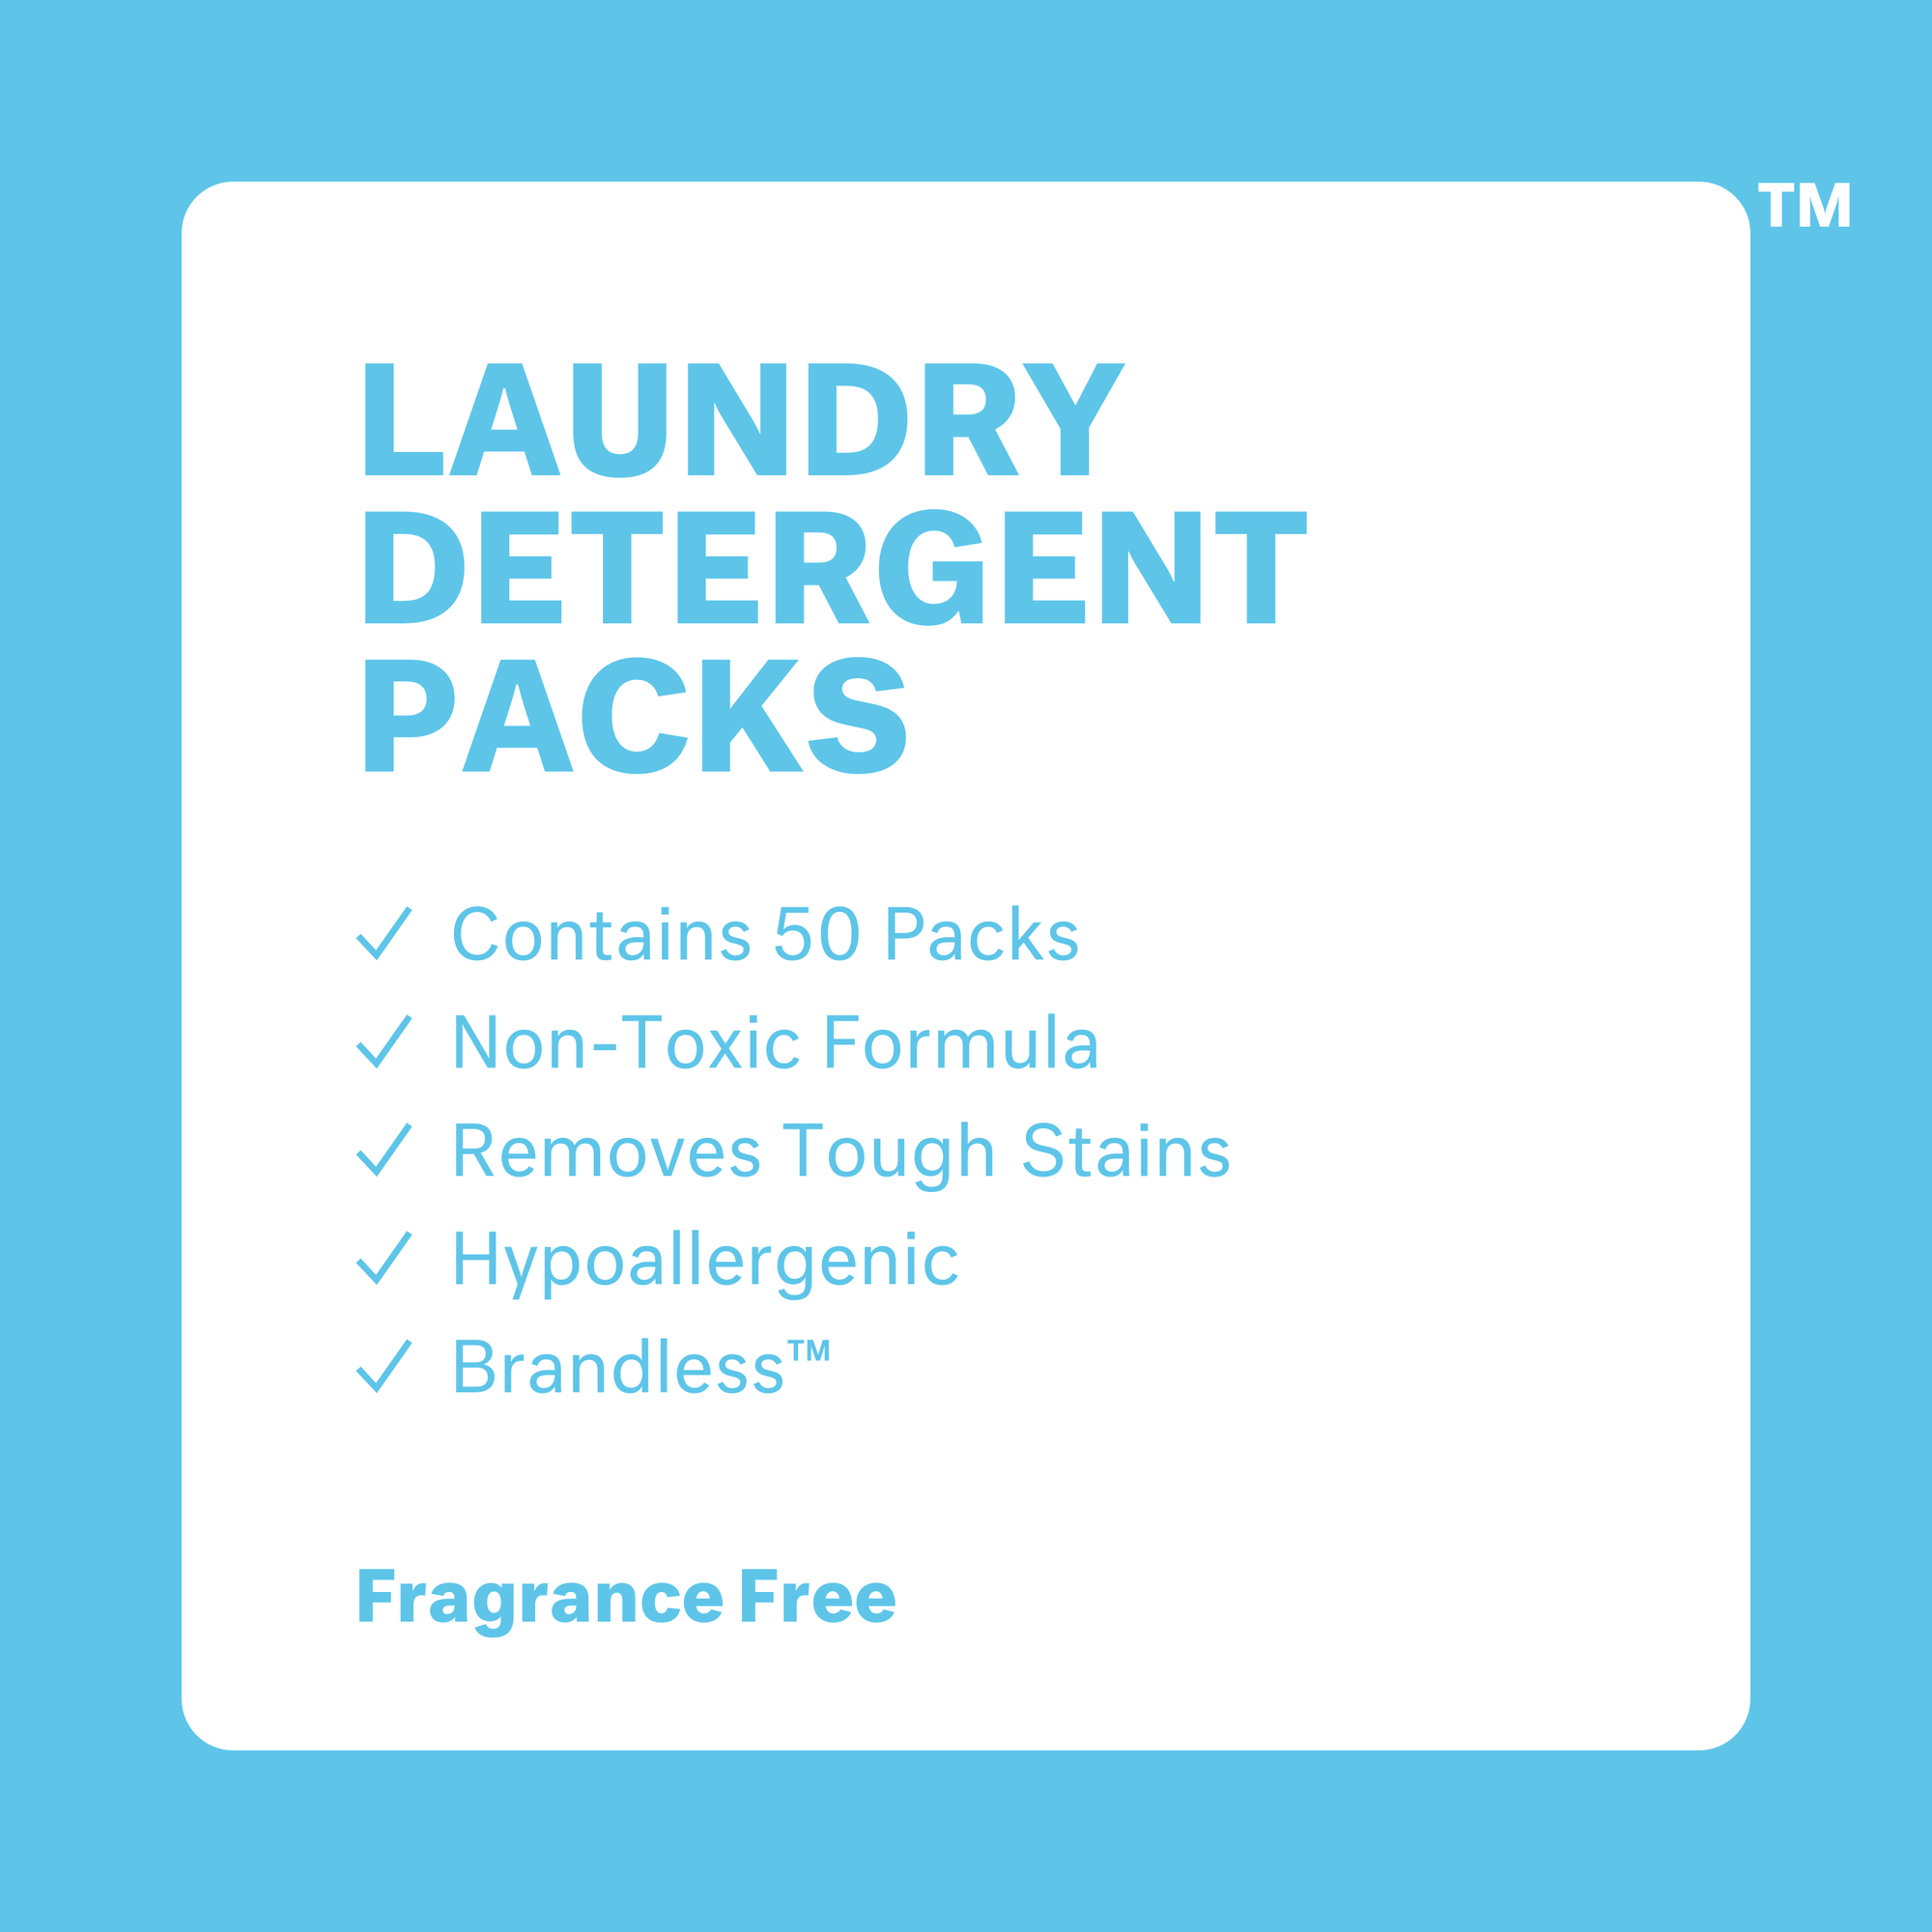 Tub shown with two packs in front. Laundry Detergent Packs: Fragrance Free. Contains 50 packs. Non-toxic formula. Removes tough stains. Hypoallergenic. Brandless. NET WT 26.4 OZ (1 LB 10.4 OZ)